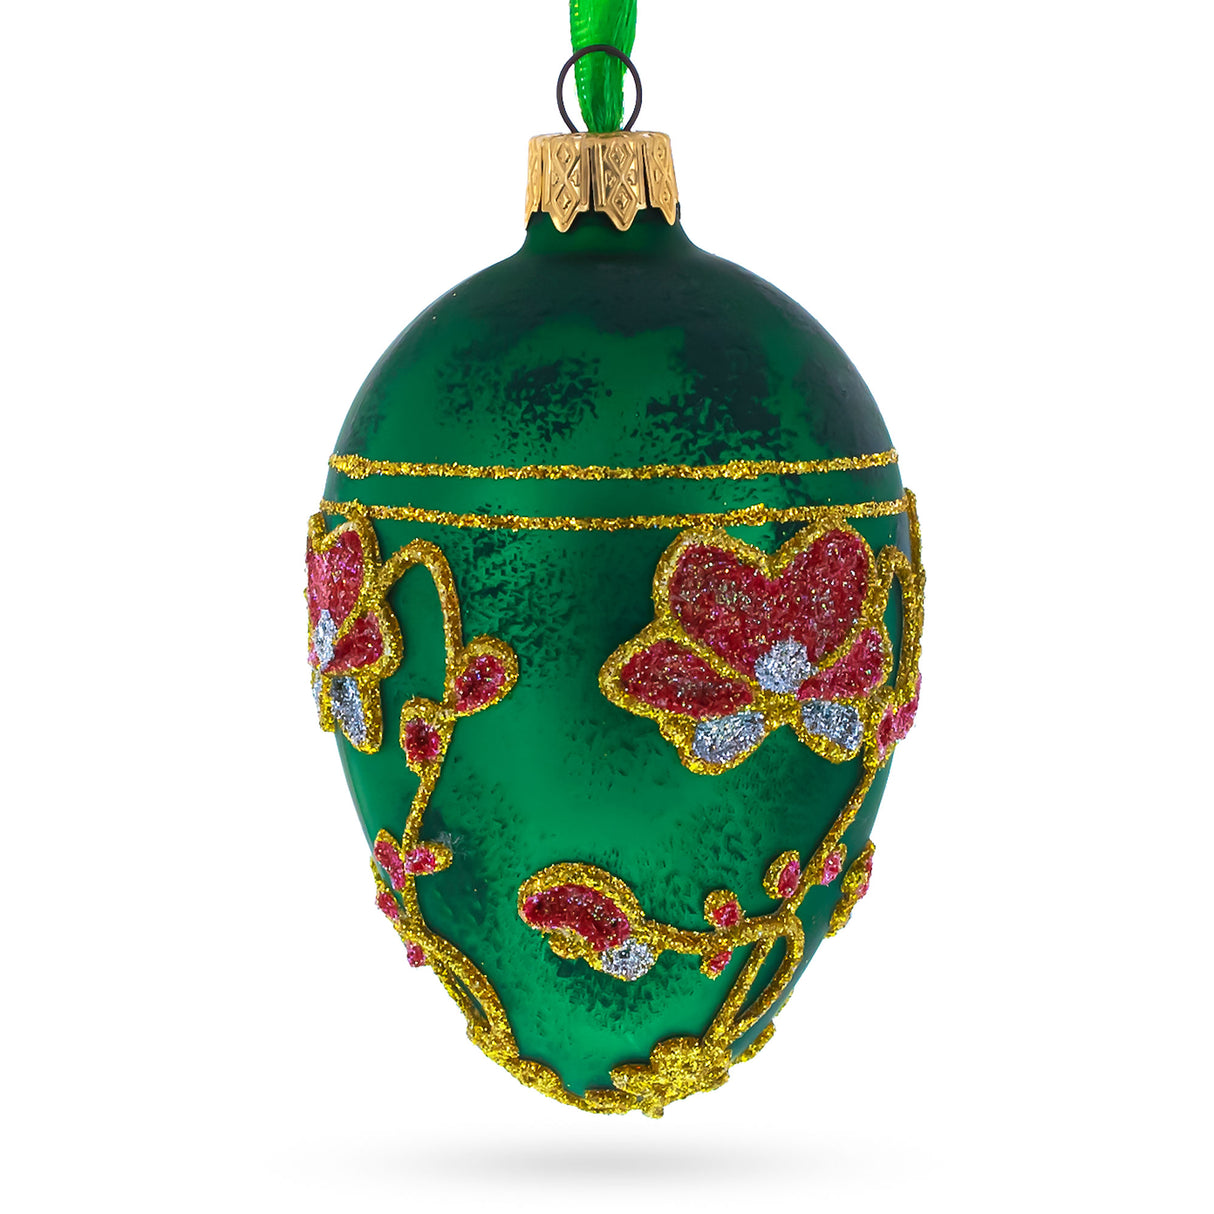 Buy Christmas Ornaments Glass Eggs Royal Imperial by BestPysanky Online Gift Ship